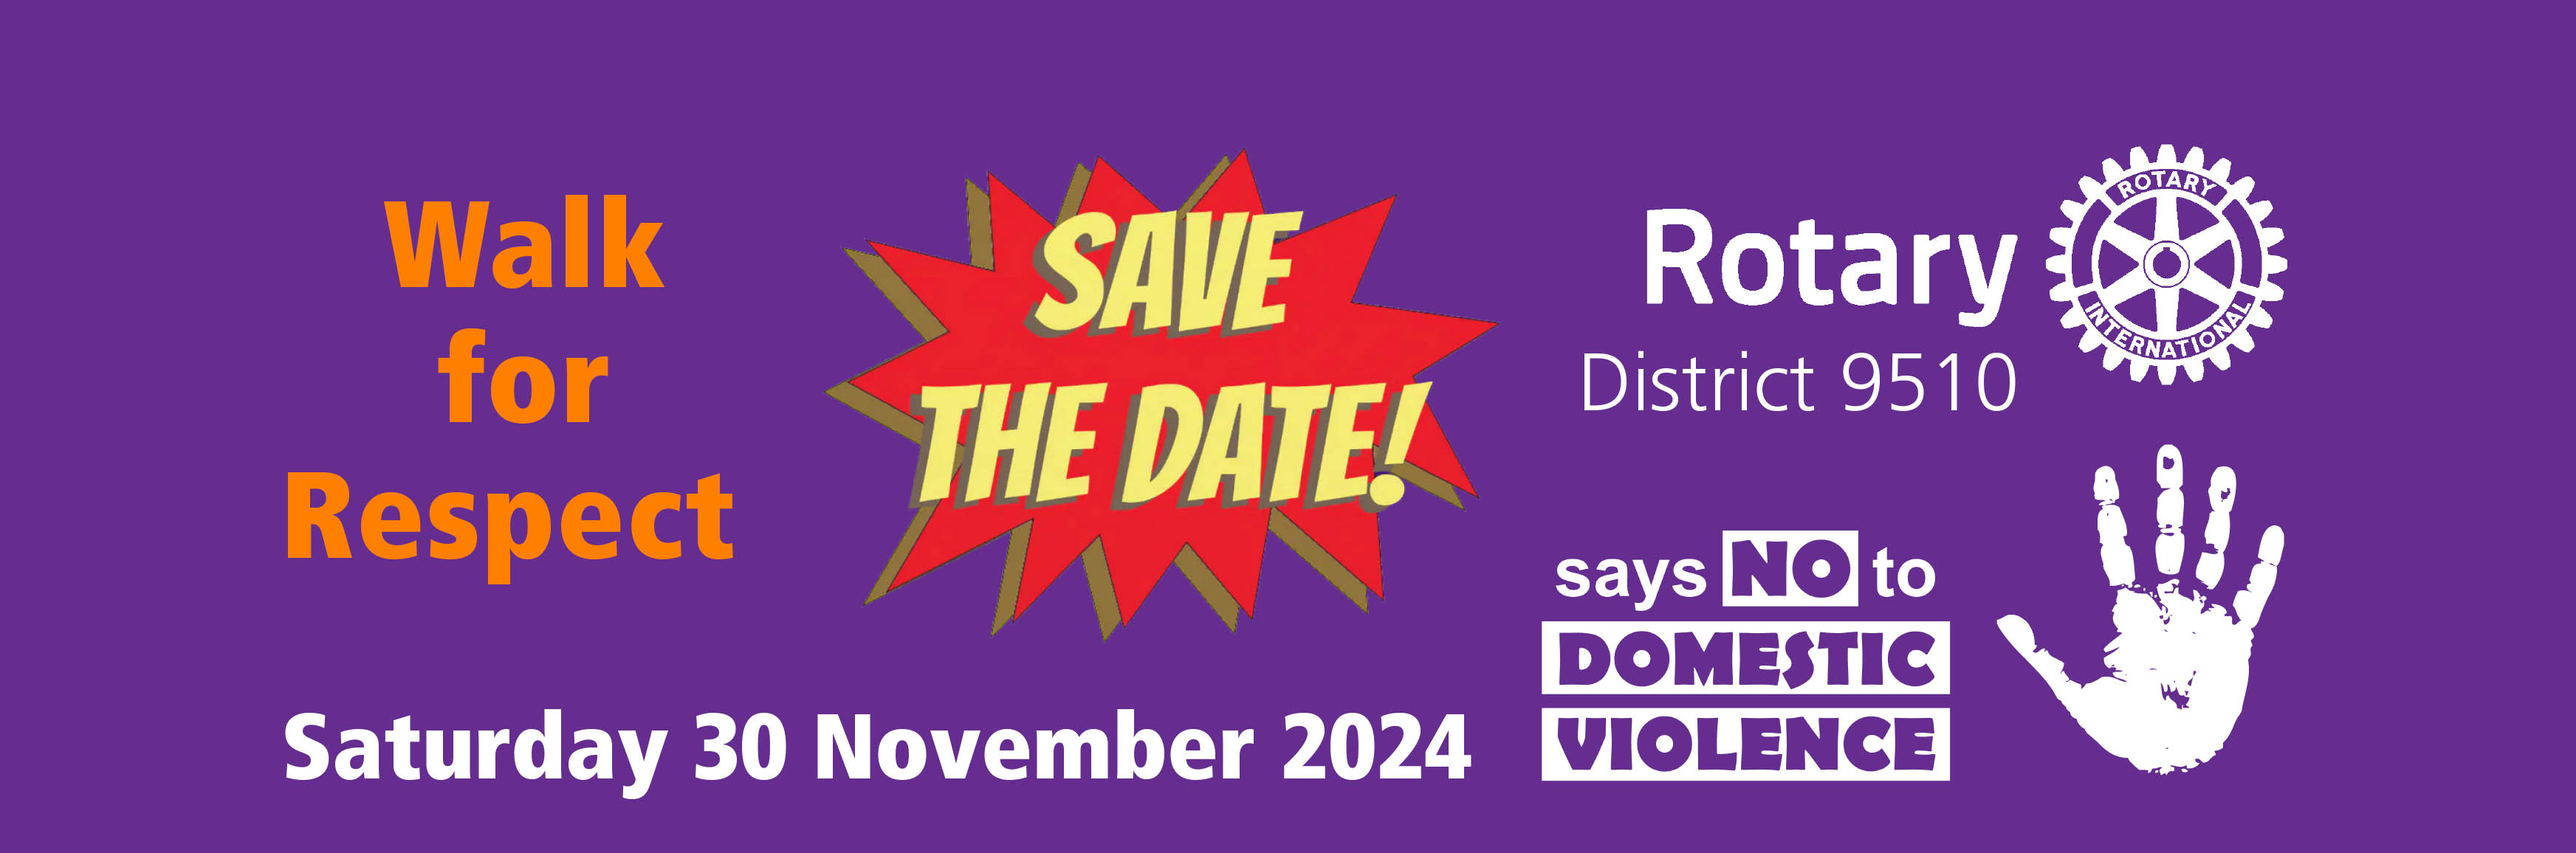 Rotary Says NO to Domestic Violence